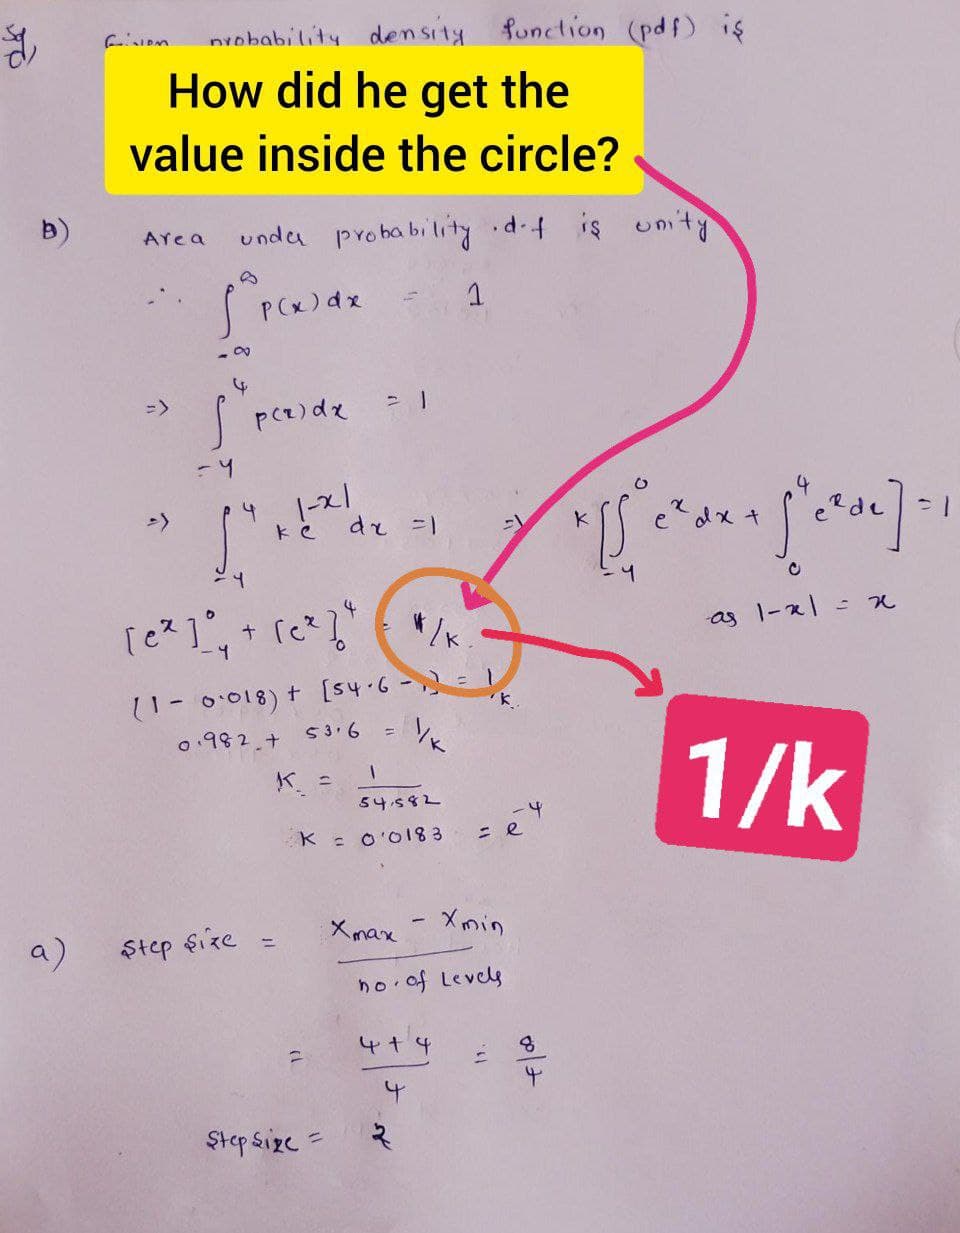 nvobability density function (pdf) is
How did he get the
value inside the circle?
unda probability d.4 is umty
AYea
PCx)dx
->
14.1-x1
dr =1
e?dx +
e de
「cス]°.
+ (c
as 1-x1
11-0:018) t [s4.6-) =
0.982.+
53.6
%3D
1/k
K. =
54582
K : O'O183
トー
a)
Step $ize
Xmax - Xmin
%3D
ho of Levels
4+4
Ştep sizc =
